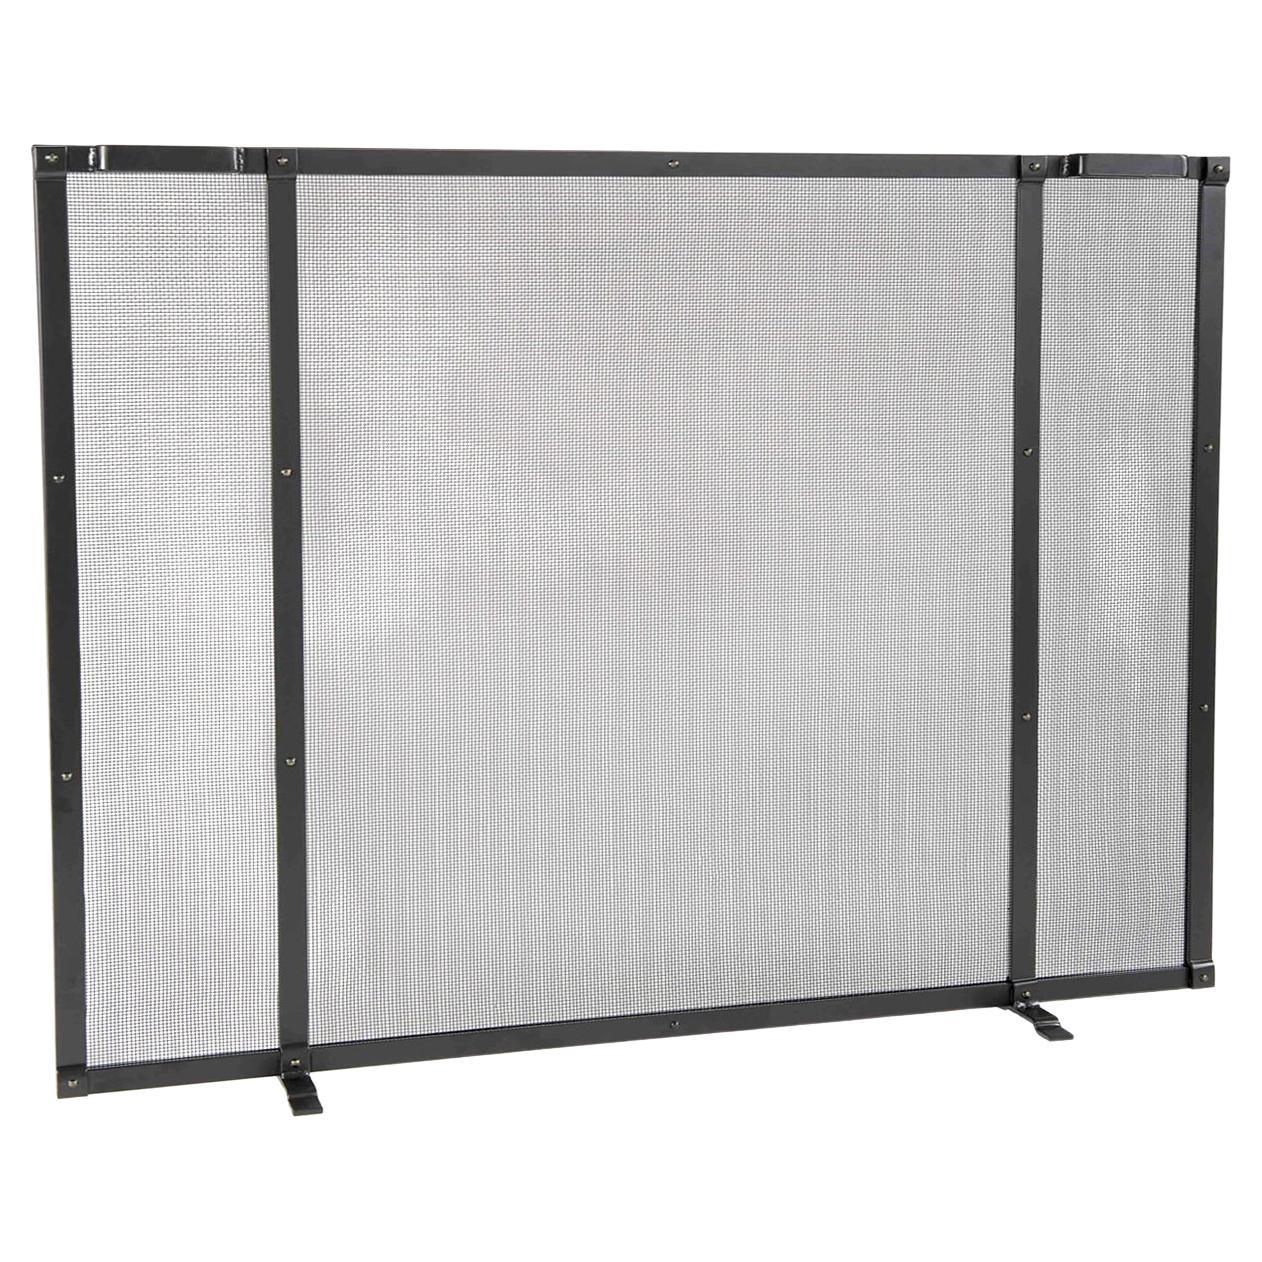 Gunnison Fireplace Screen in a Warm Black Finish For Sale